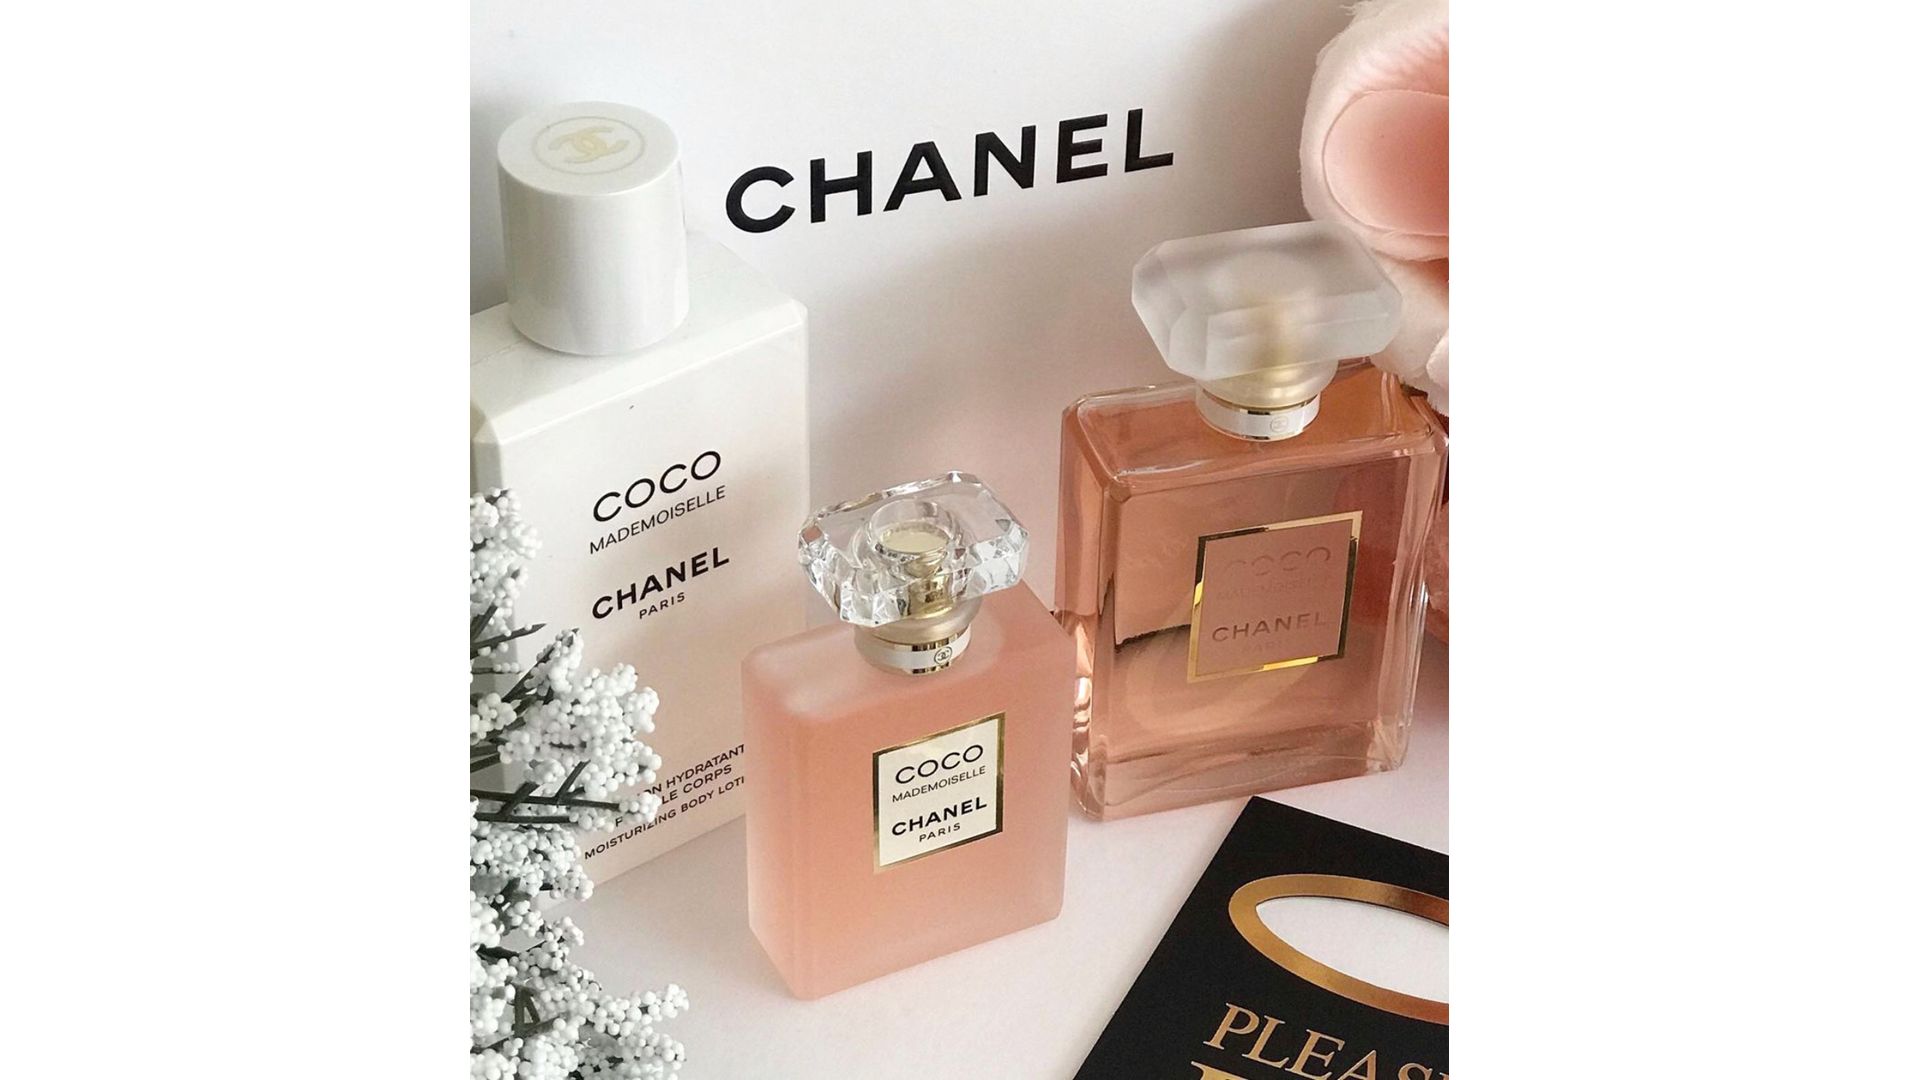 Chanel Perfumes for sale in Pinnacle Ridge, Facebook Marketplace